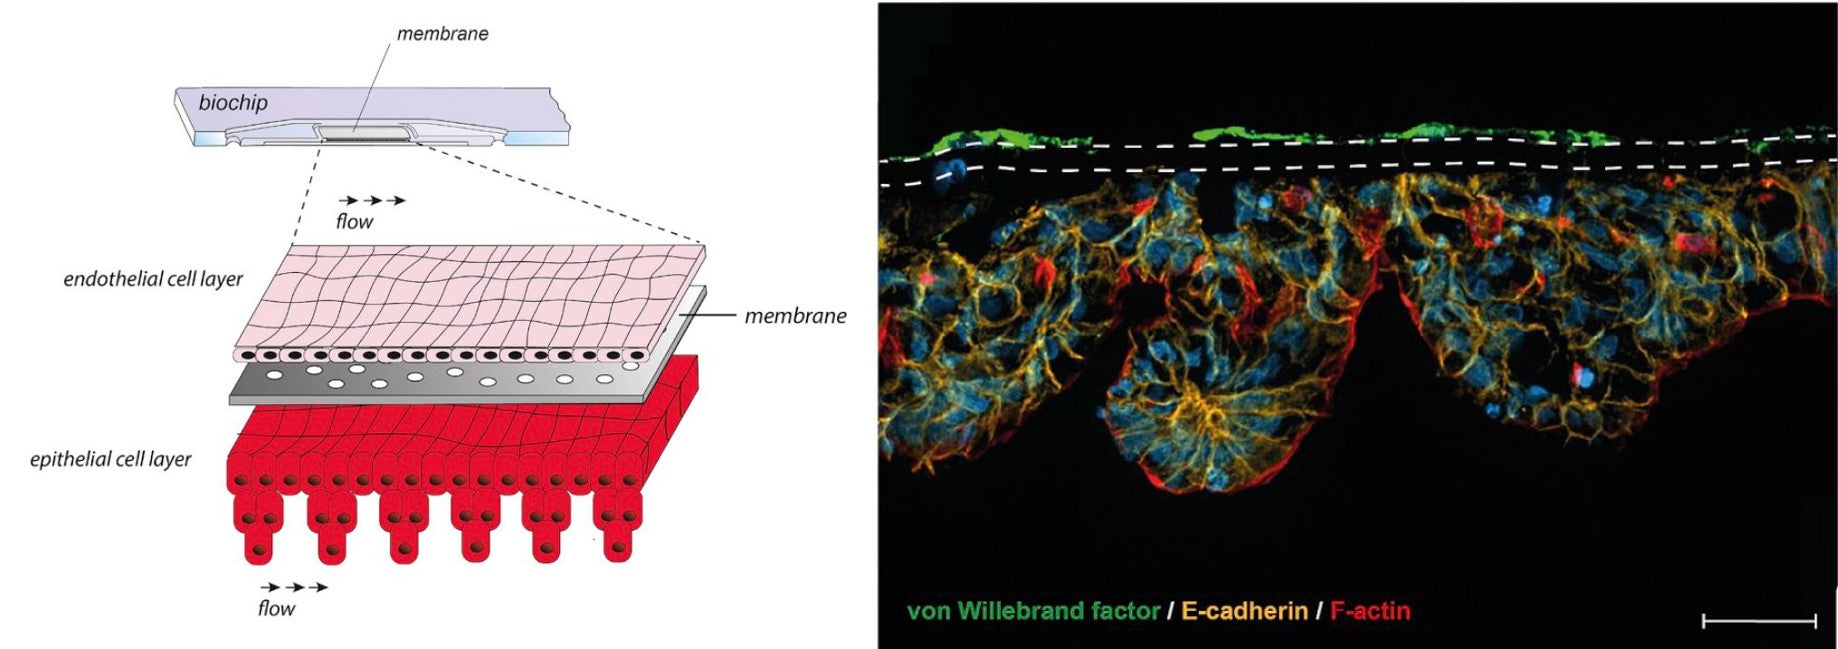 Intestine-on-chip images from the linked article